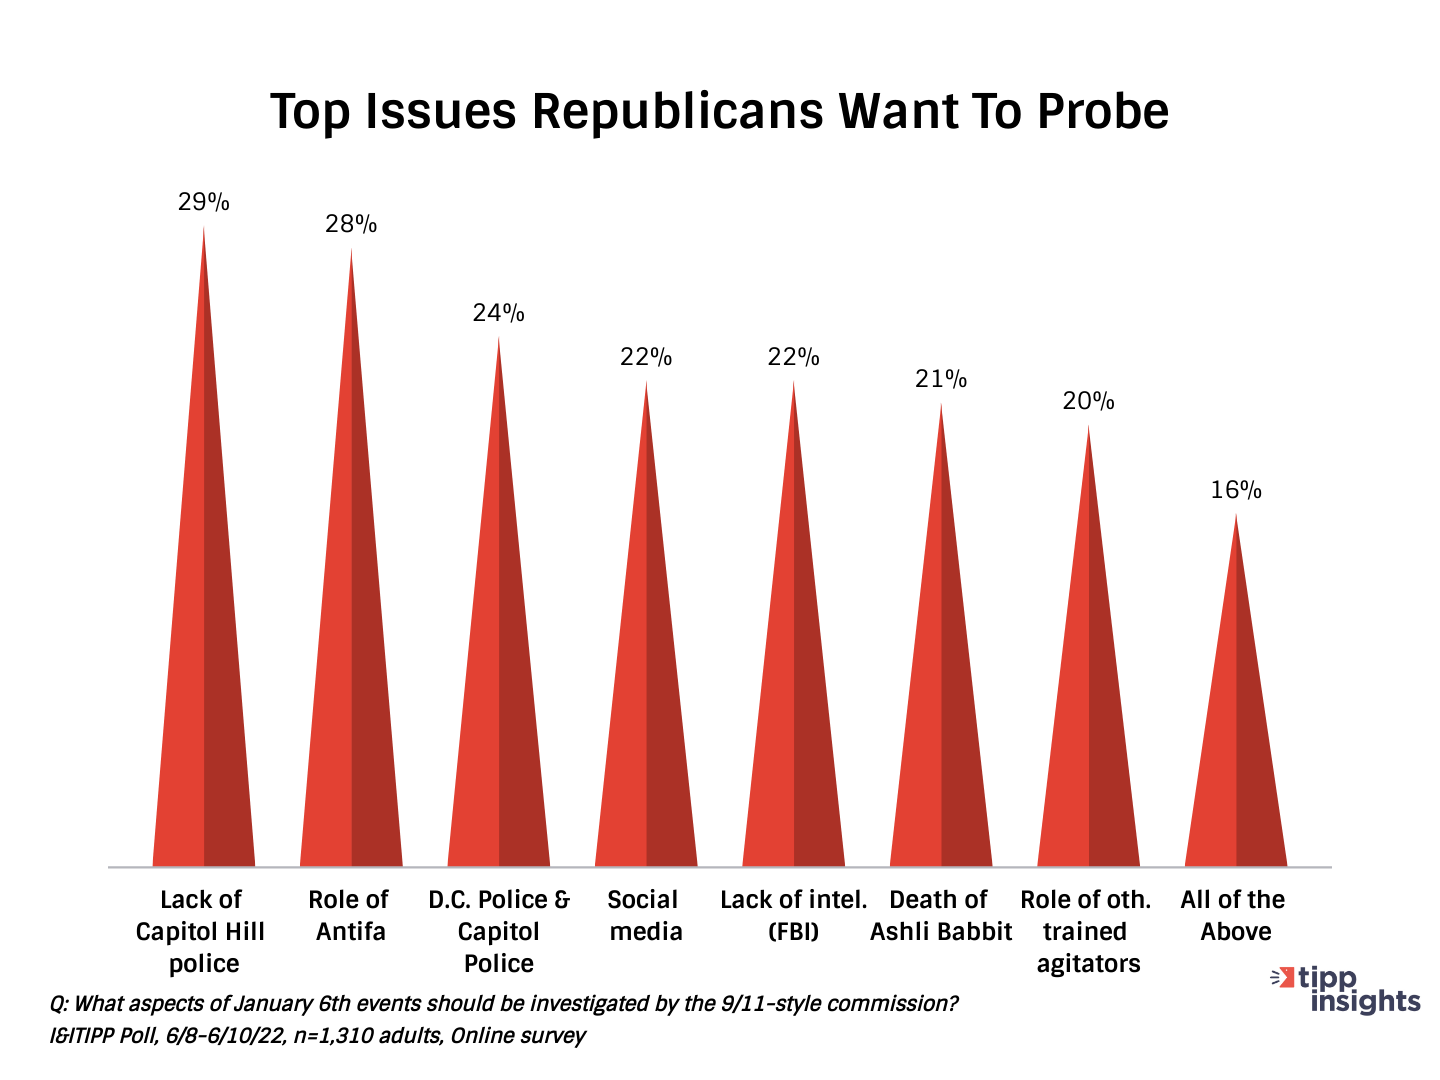 I&I/TIPP Poll Results: What are the top issues Republicans want the January 6th commision to investigate?